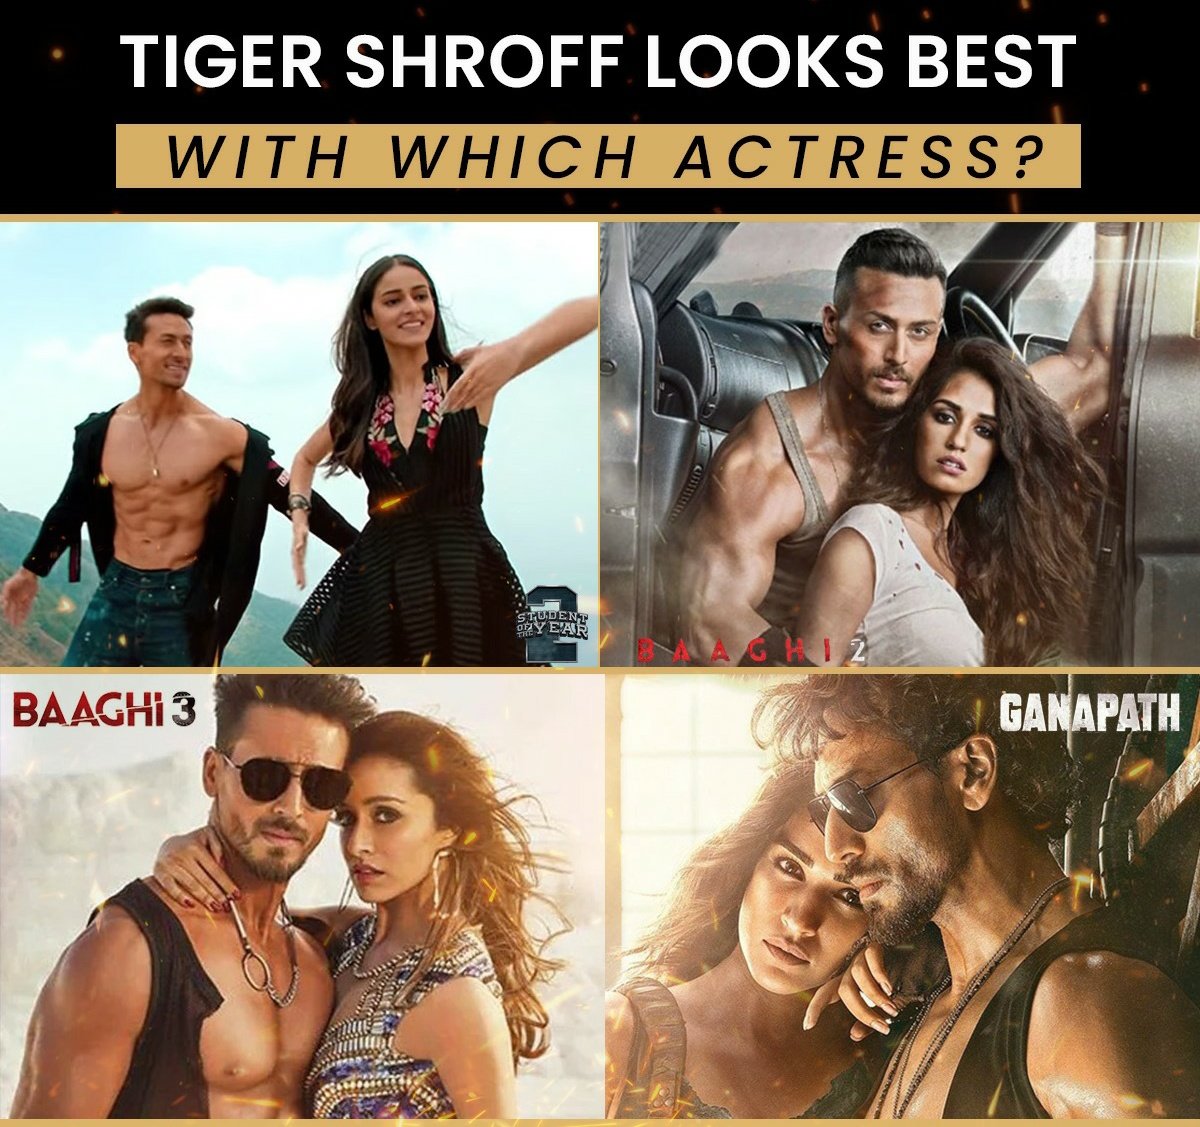 Tiger Shroff has always formed a nice jodi with the female lead, be it #SOTY2, #Baaghi2, #Baaghi3 or #Ganapath! ❤🔥
With which actress does he shine the most?

Let us know in the comments below.

#Ganapath coming to an #INOX near you on 20th October. Book tickets now.